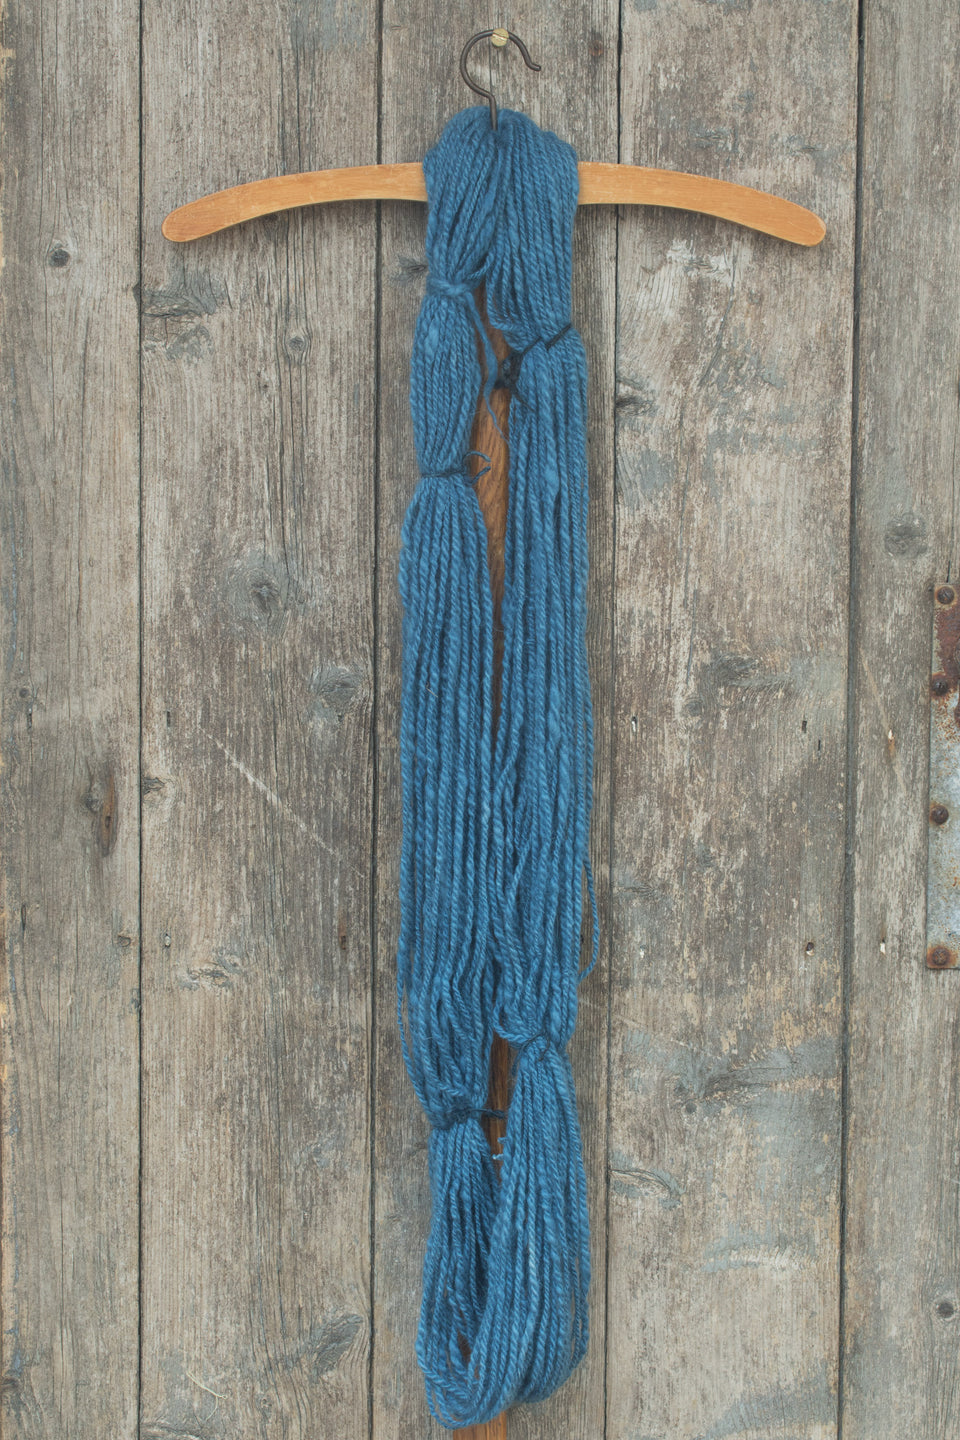 loragub yarn. hand-spun, hand-dyed with natural indigo. angora and merino mix in a rustic style